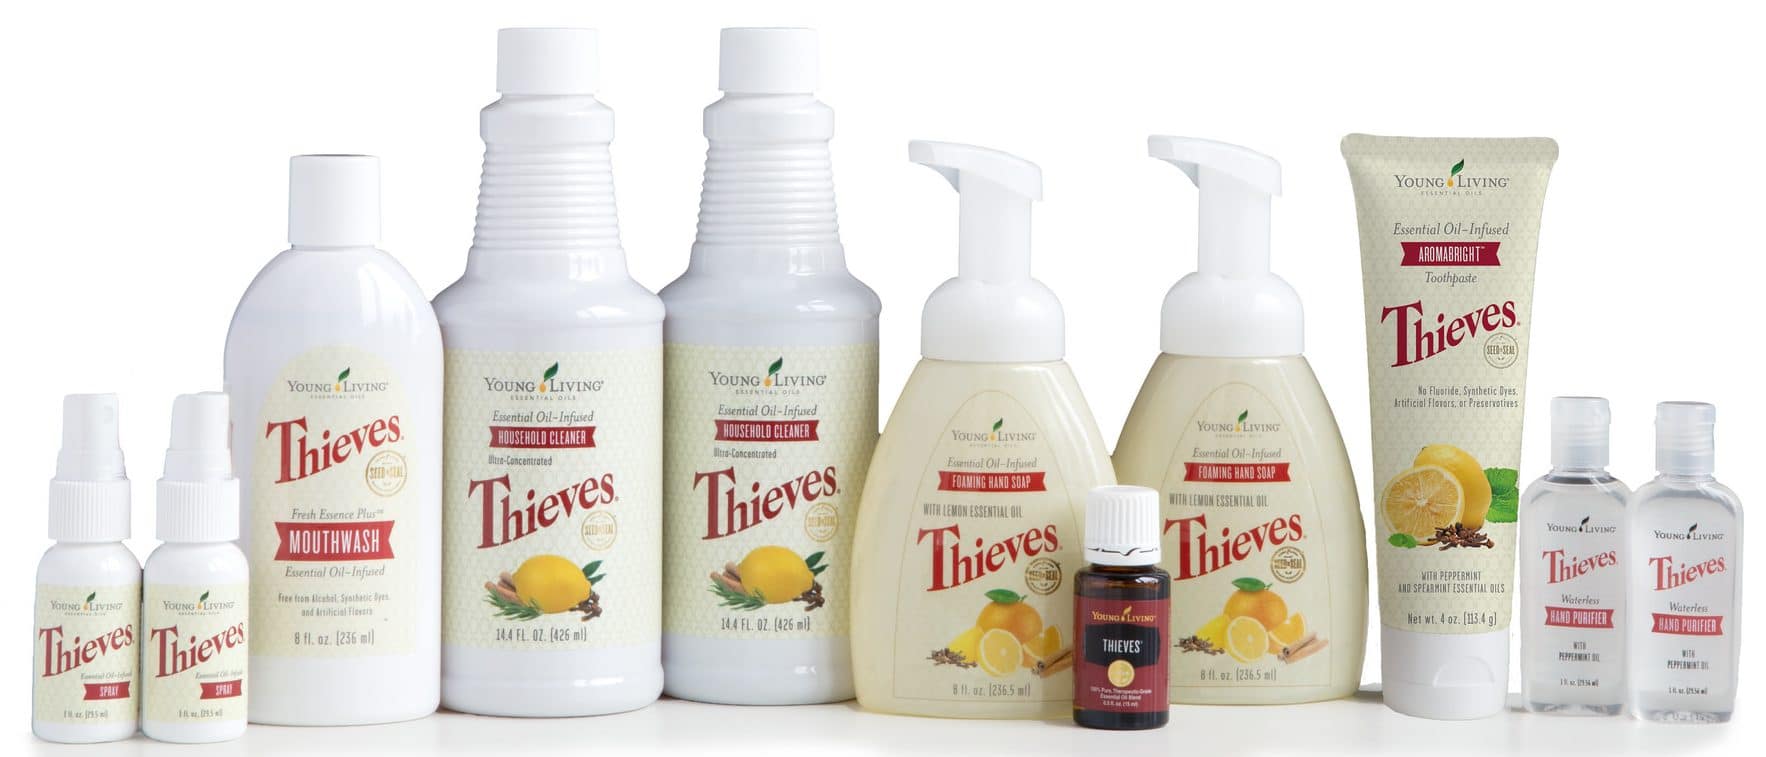 Thieves Premium Starter Kit from Young Living